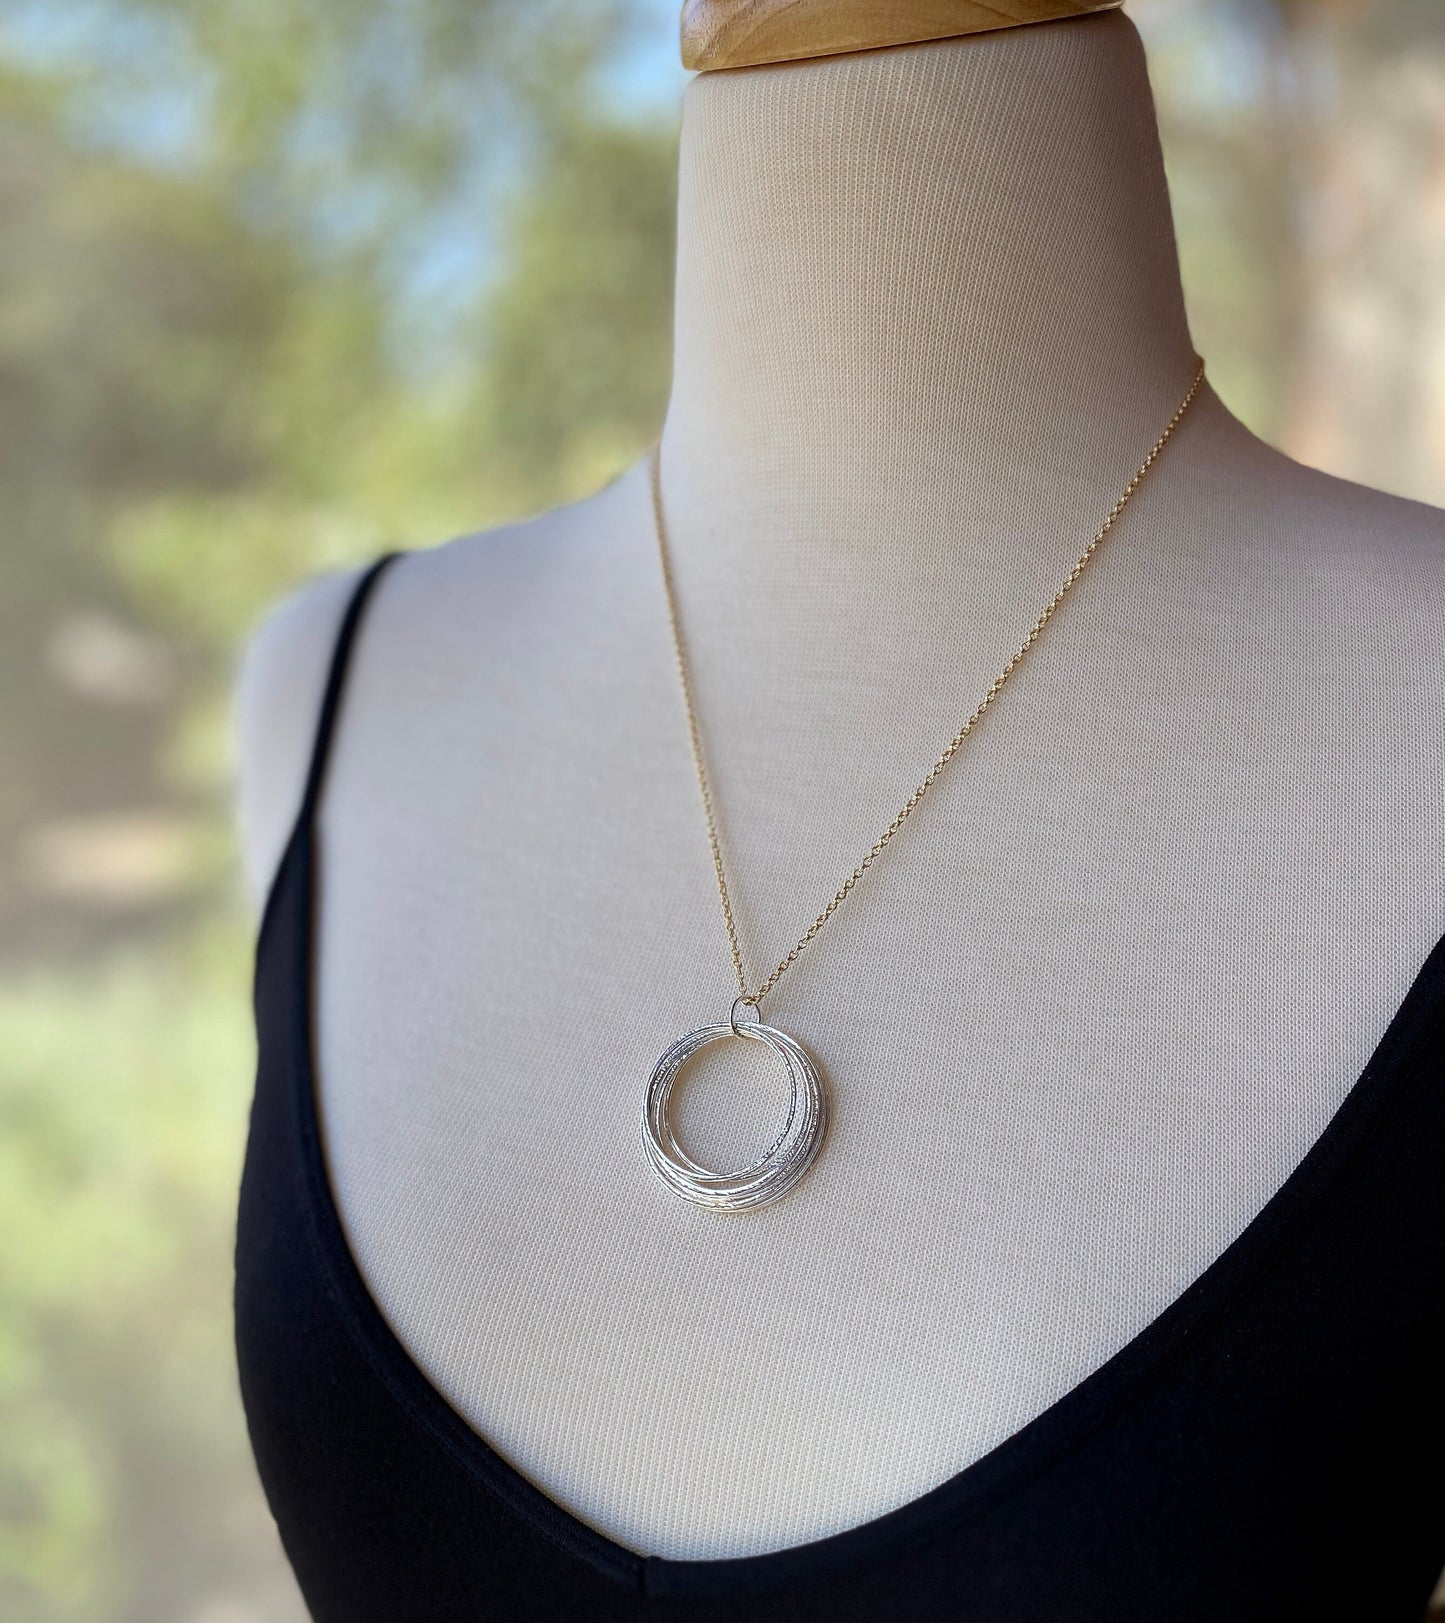 7 Circle 70th Birthday Milestone Necklace, Bold Sterling Silver Handcrafted Sparkly Circles Pendant, 7 Rings for 7 Decades, Large Circles